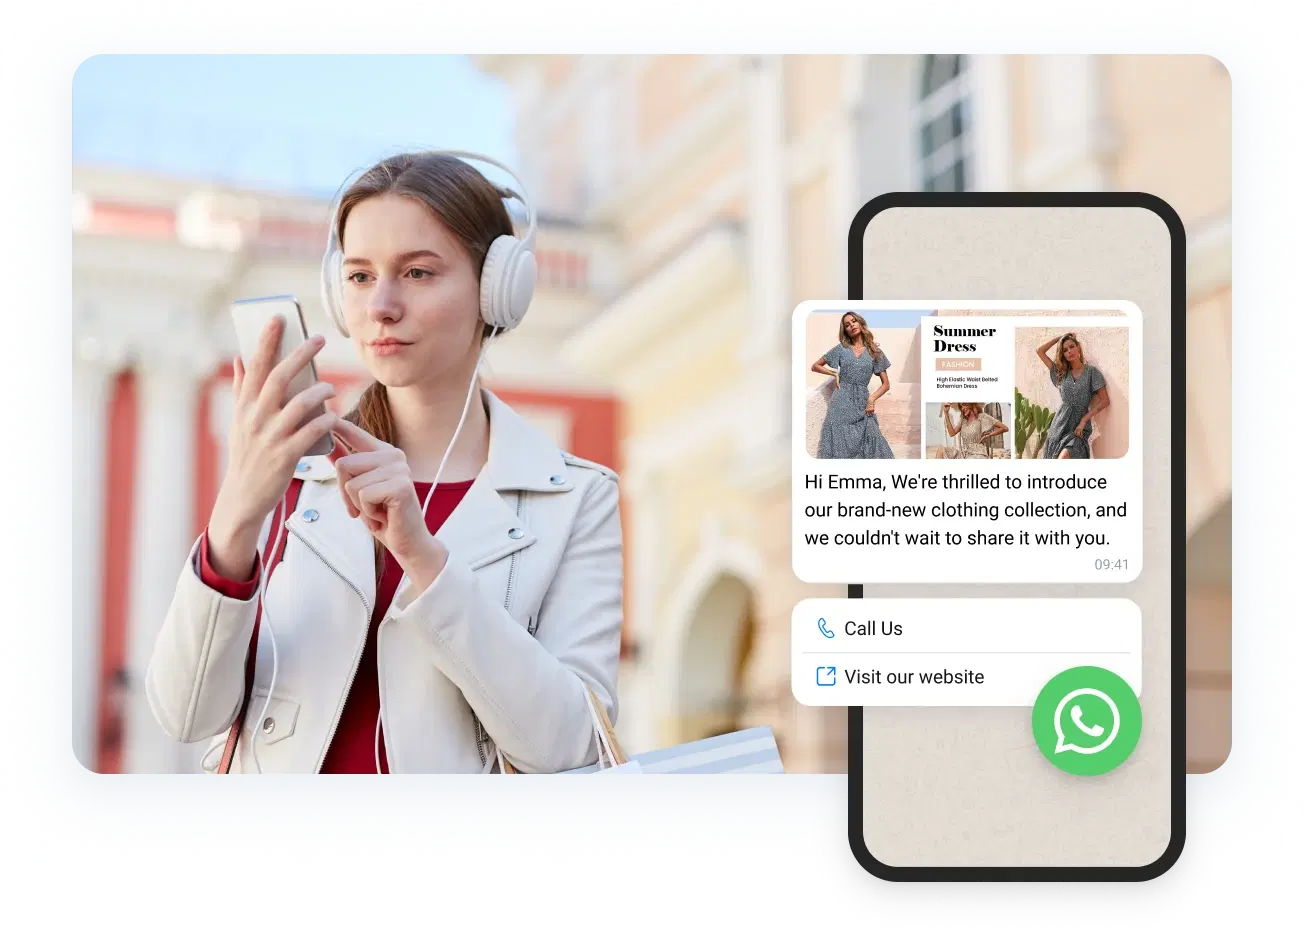 Girl with white headphones reading WhatsApp messages received from e-commerce